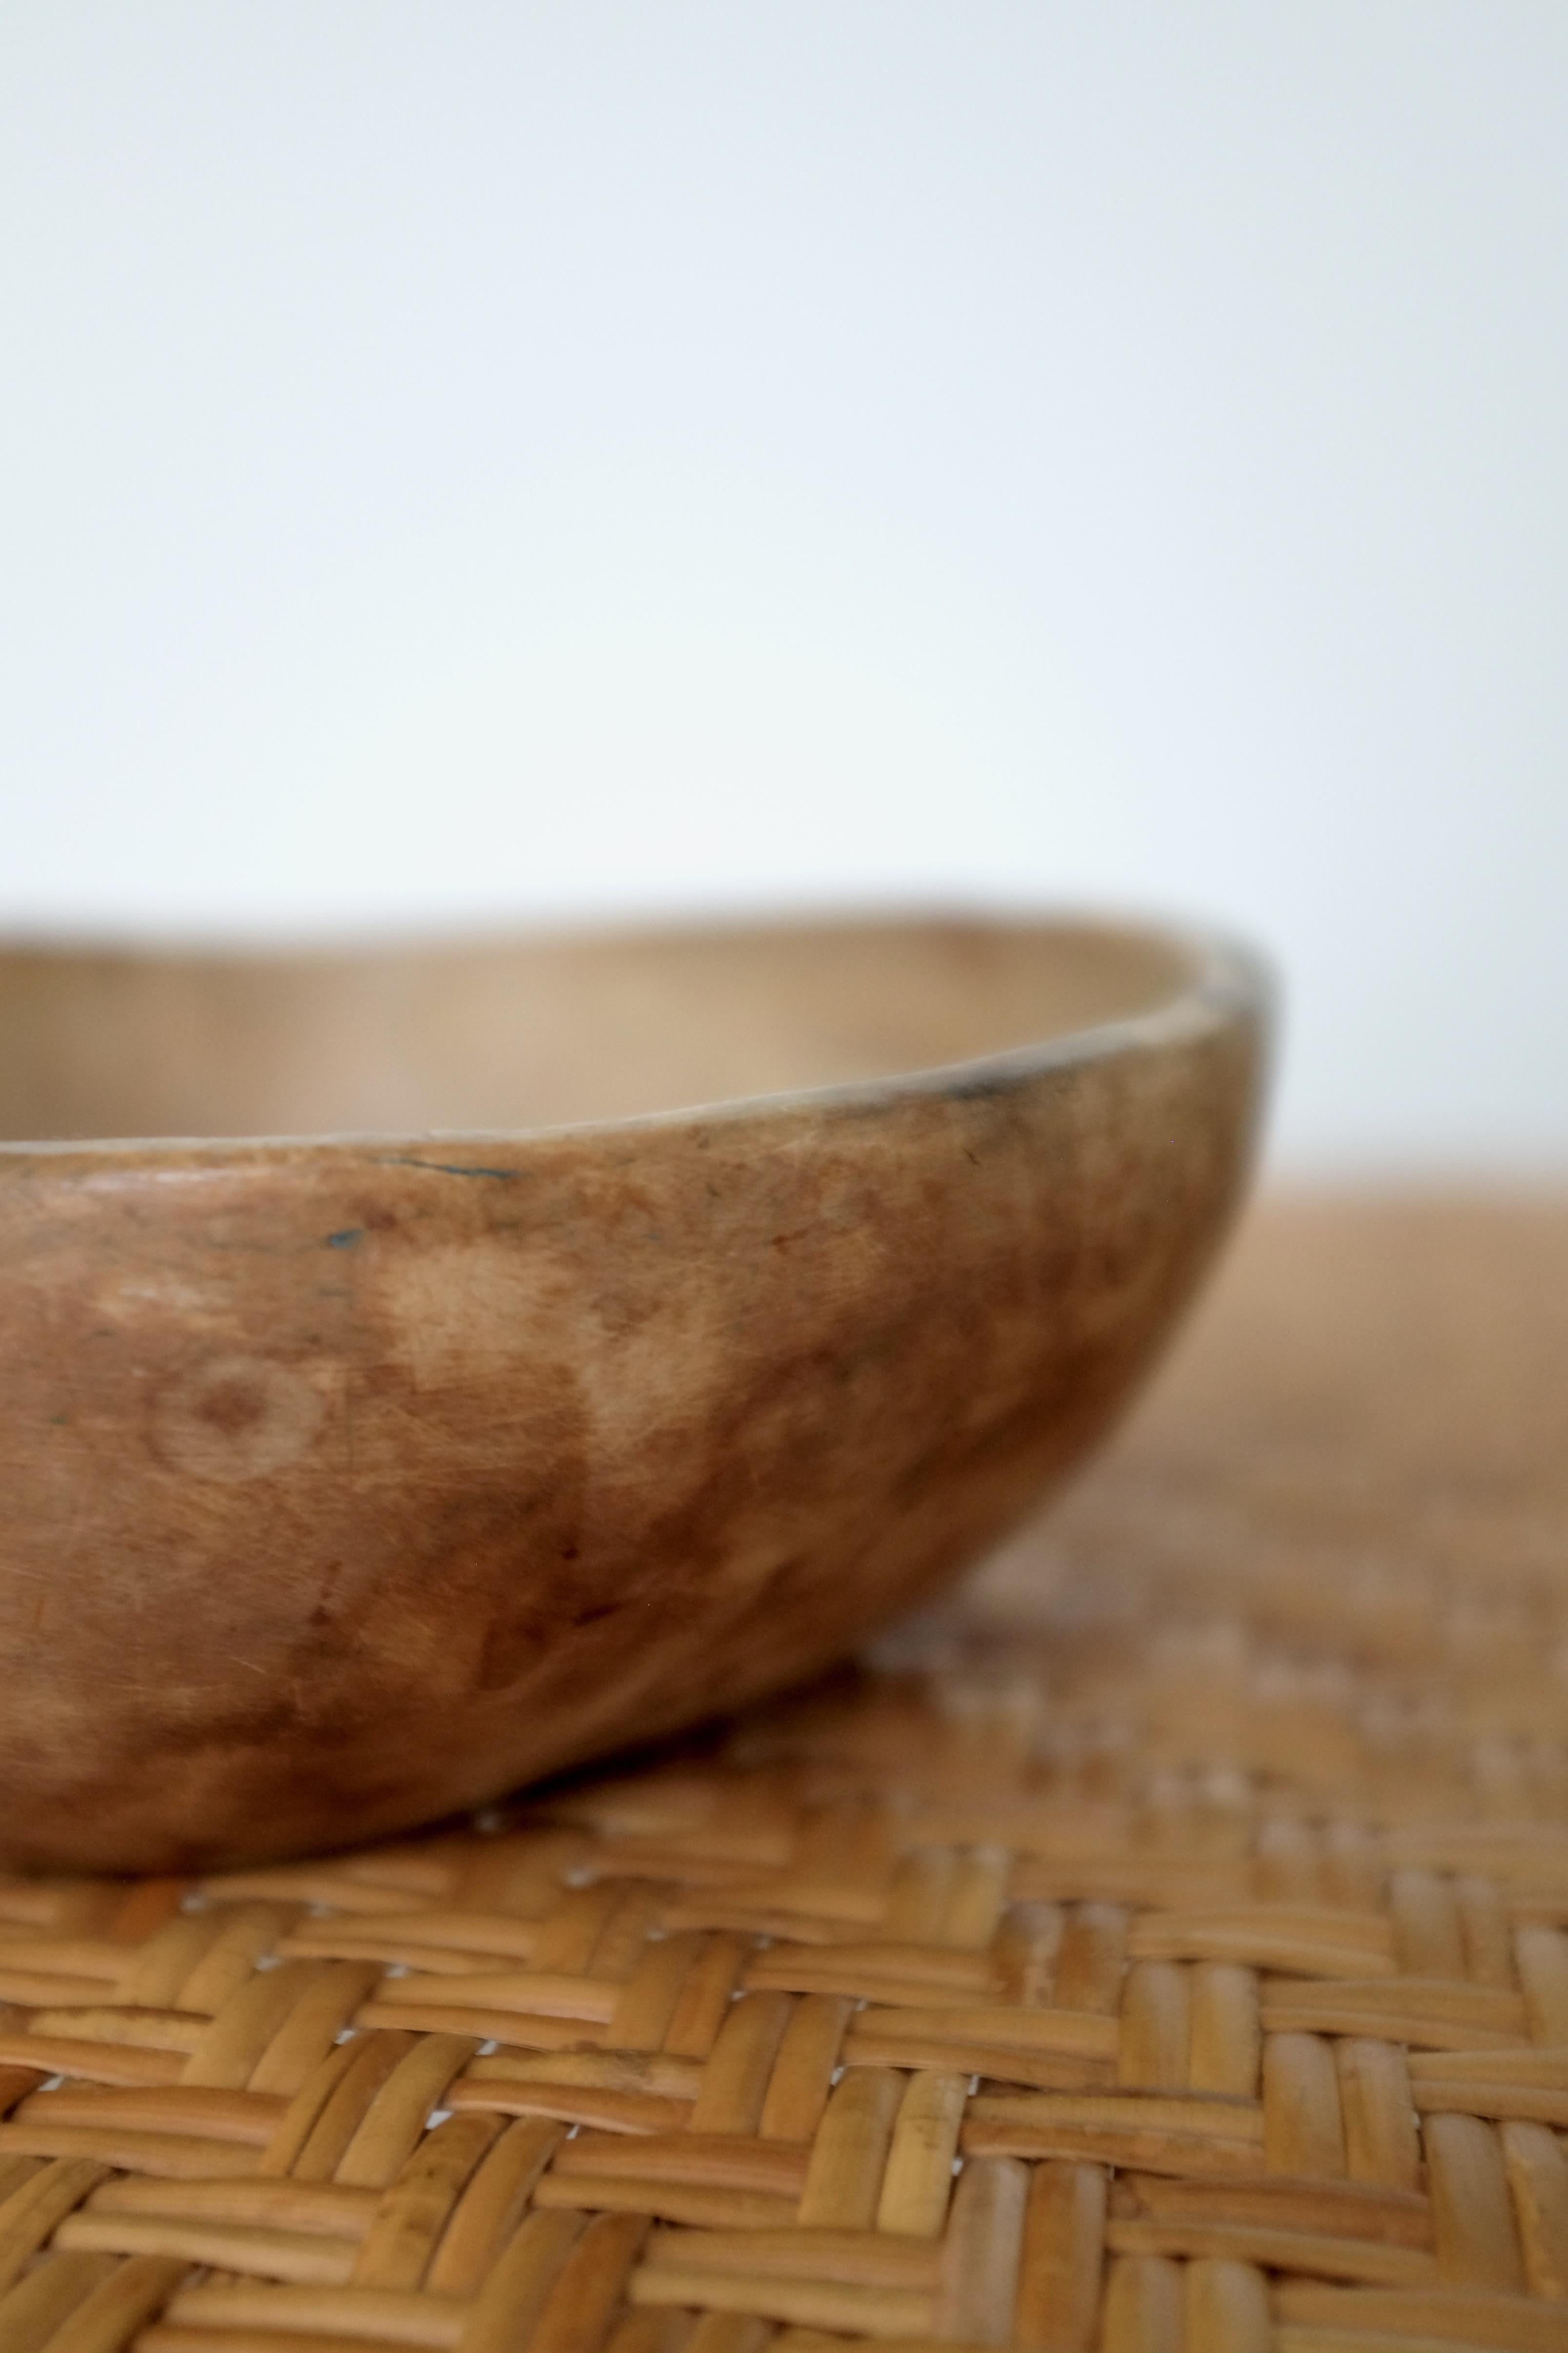 Rustic Antique Swedish Wooden Bowl from 1887